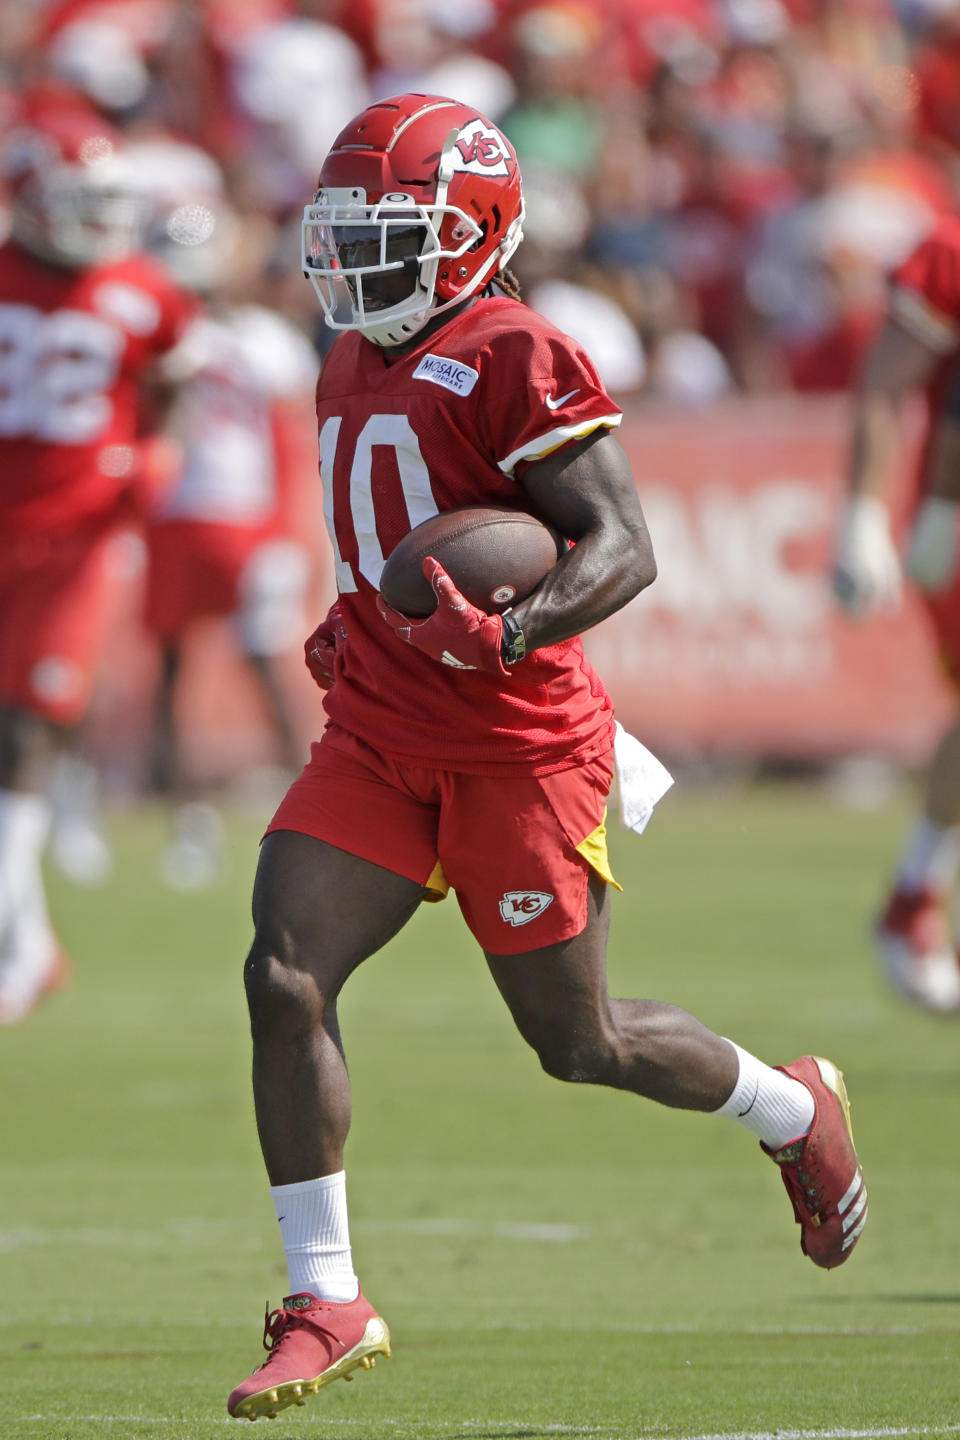 Kansas City Chiefs wide receiver Tyreek Hill runs the ball during NFL football training camp Saturday, July 27, 2019, in St. Joseph, Mo. (AP Photo/Charlie Riedel)